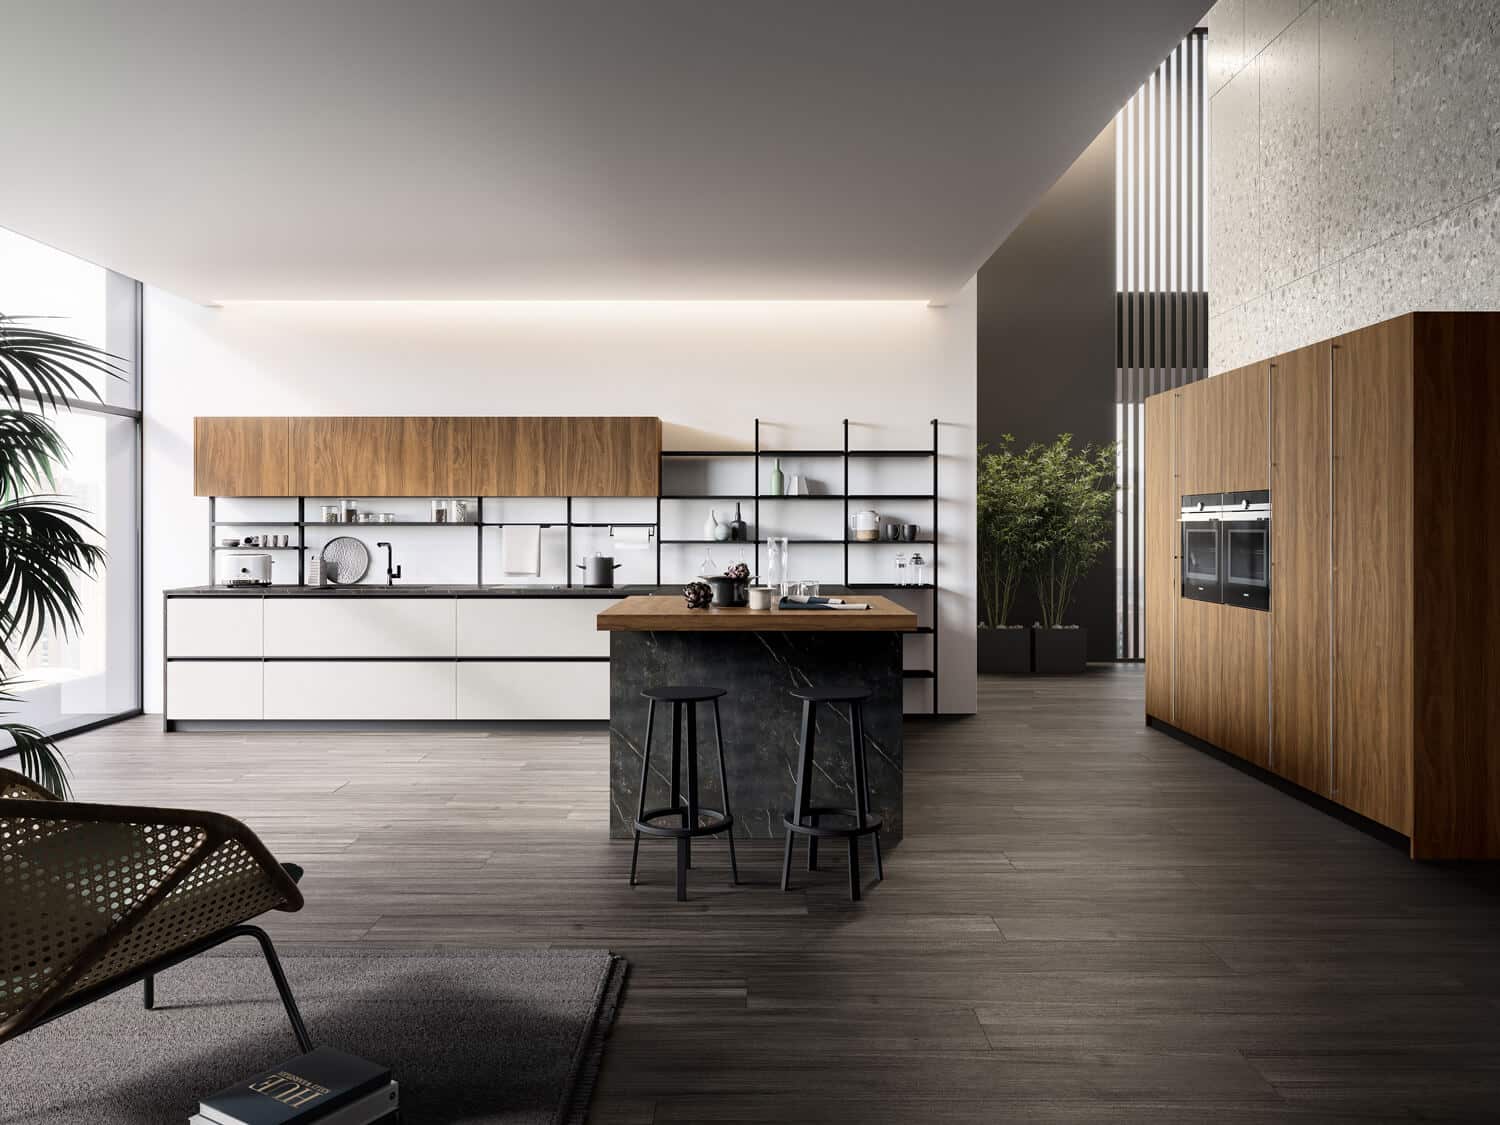 Rho modern kitchen design in Light cement (base and island cabinets) and textured wood melamine (upper cabinets and tall units).